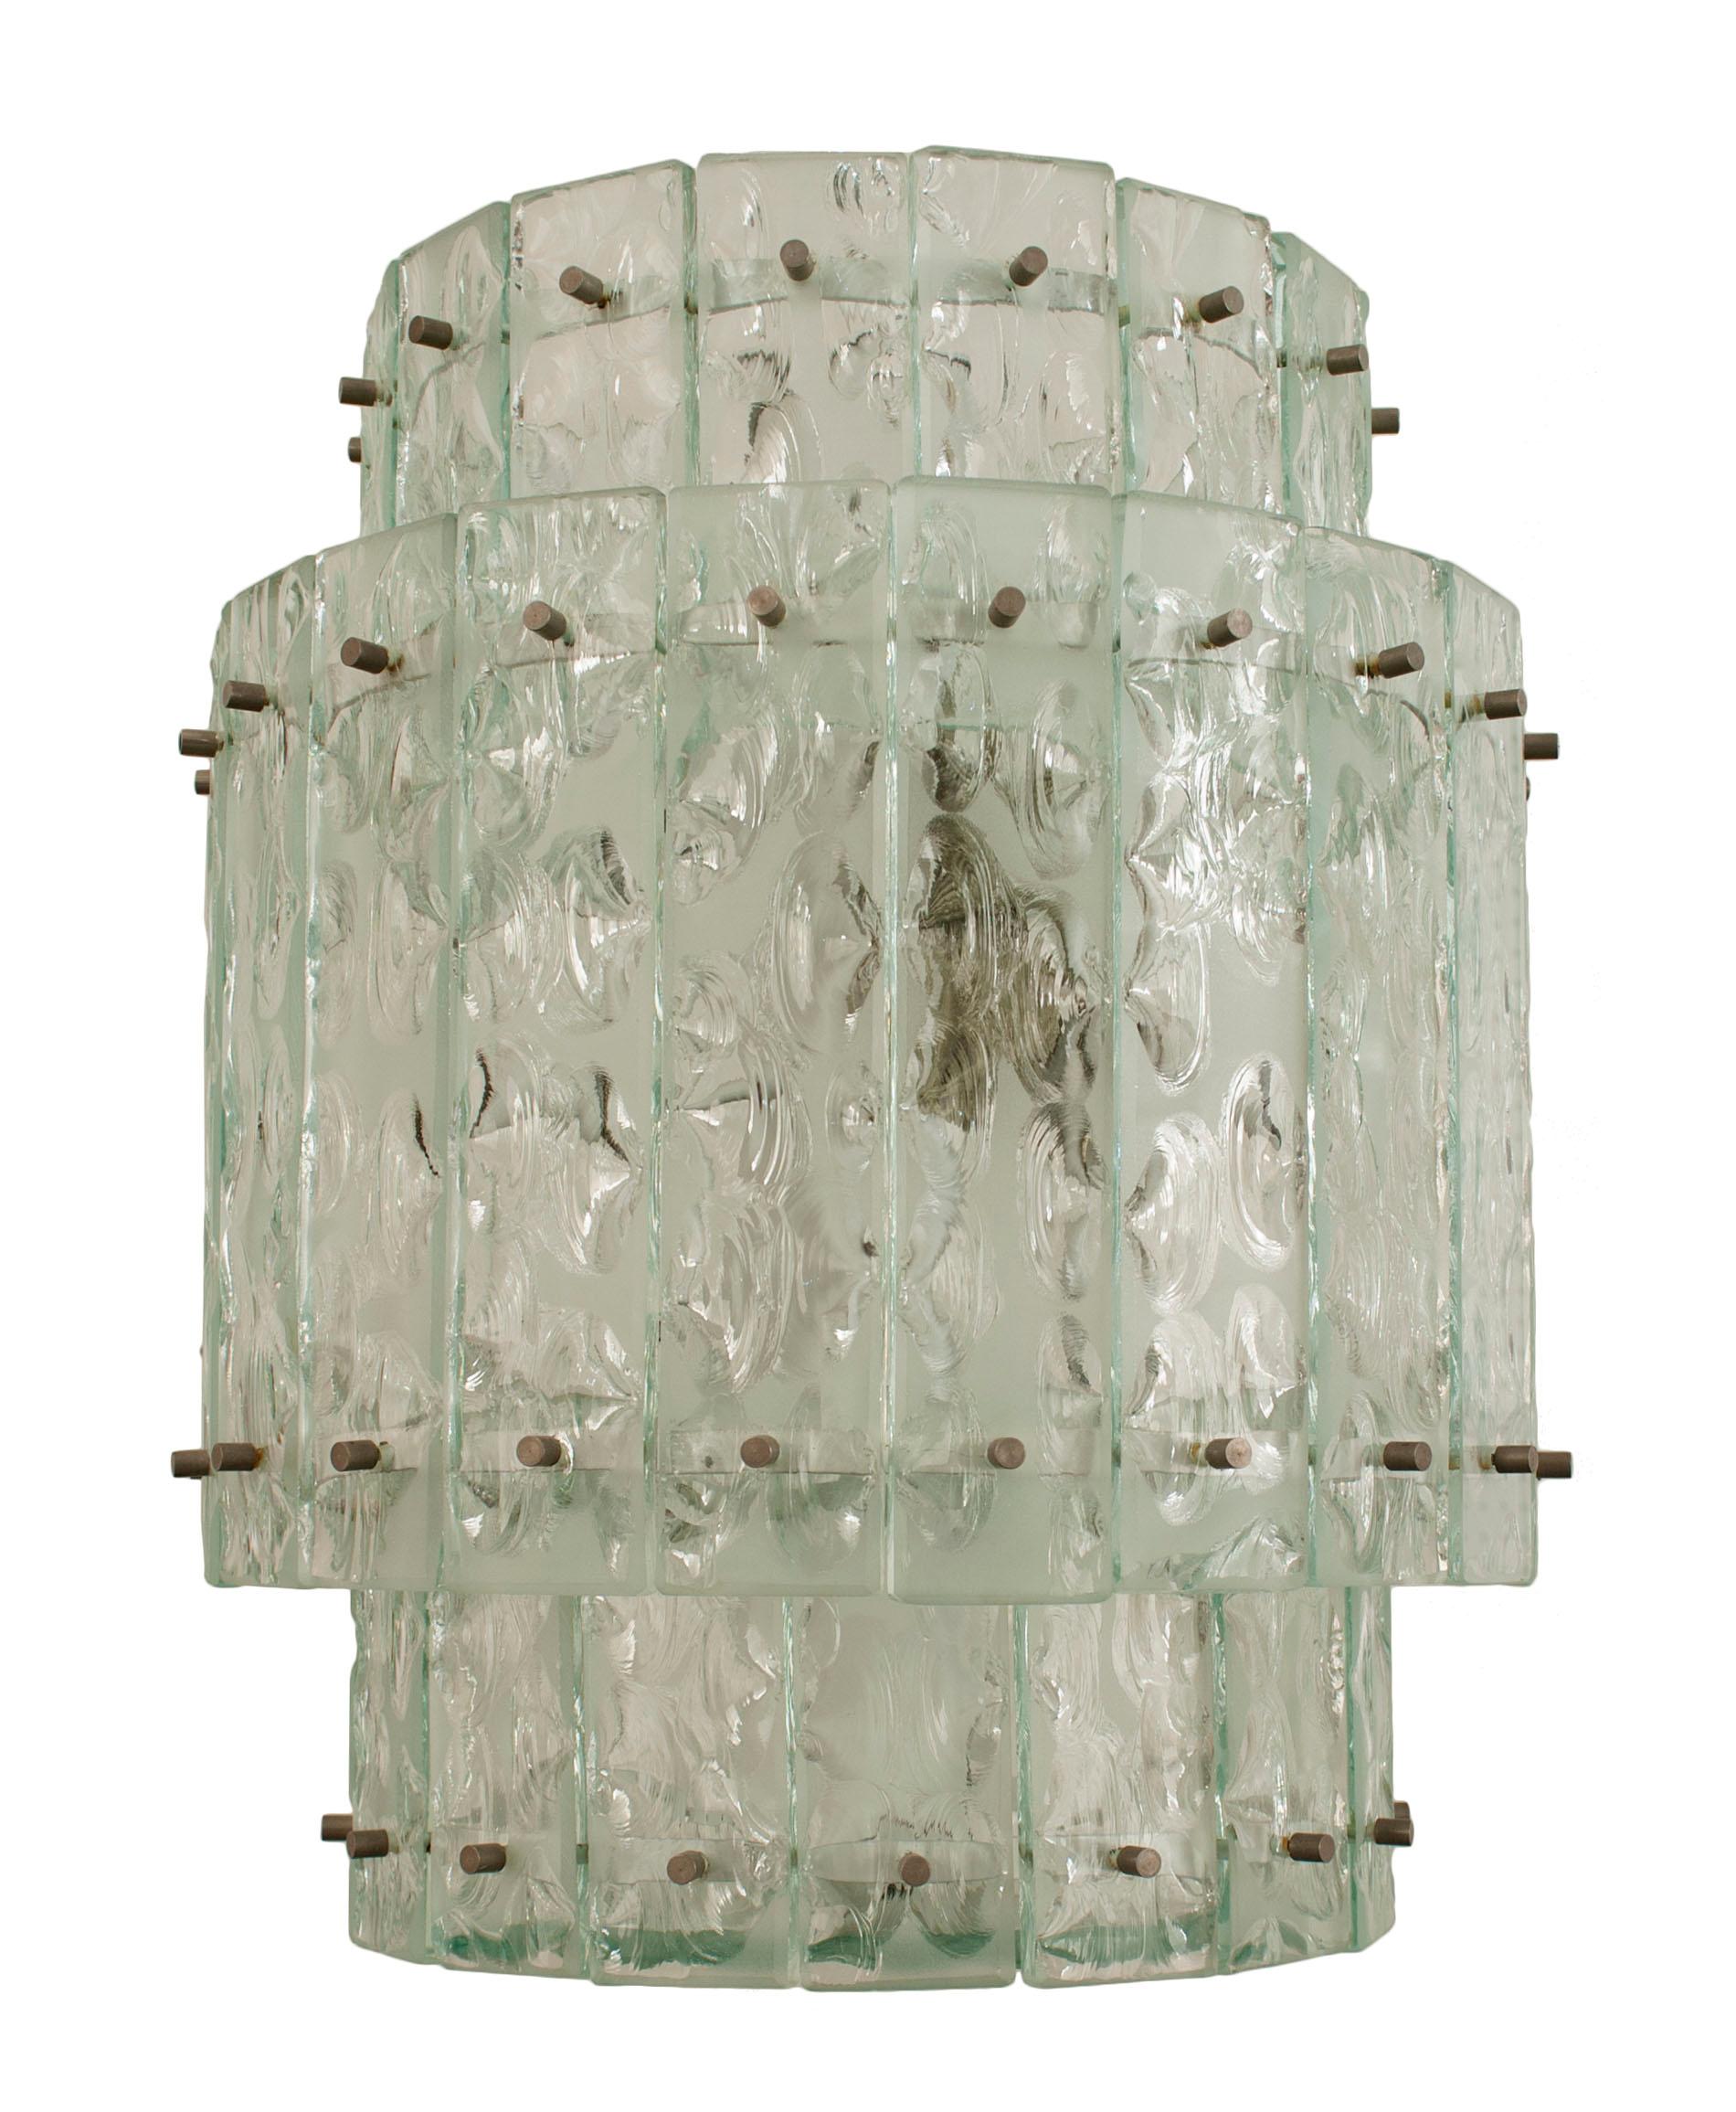 20th Century Italian Mid-Century Acid Etched Cylindrical Glass Lantern For Sale